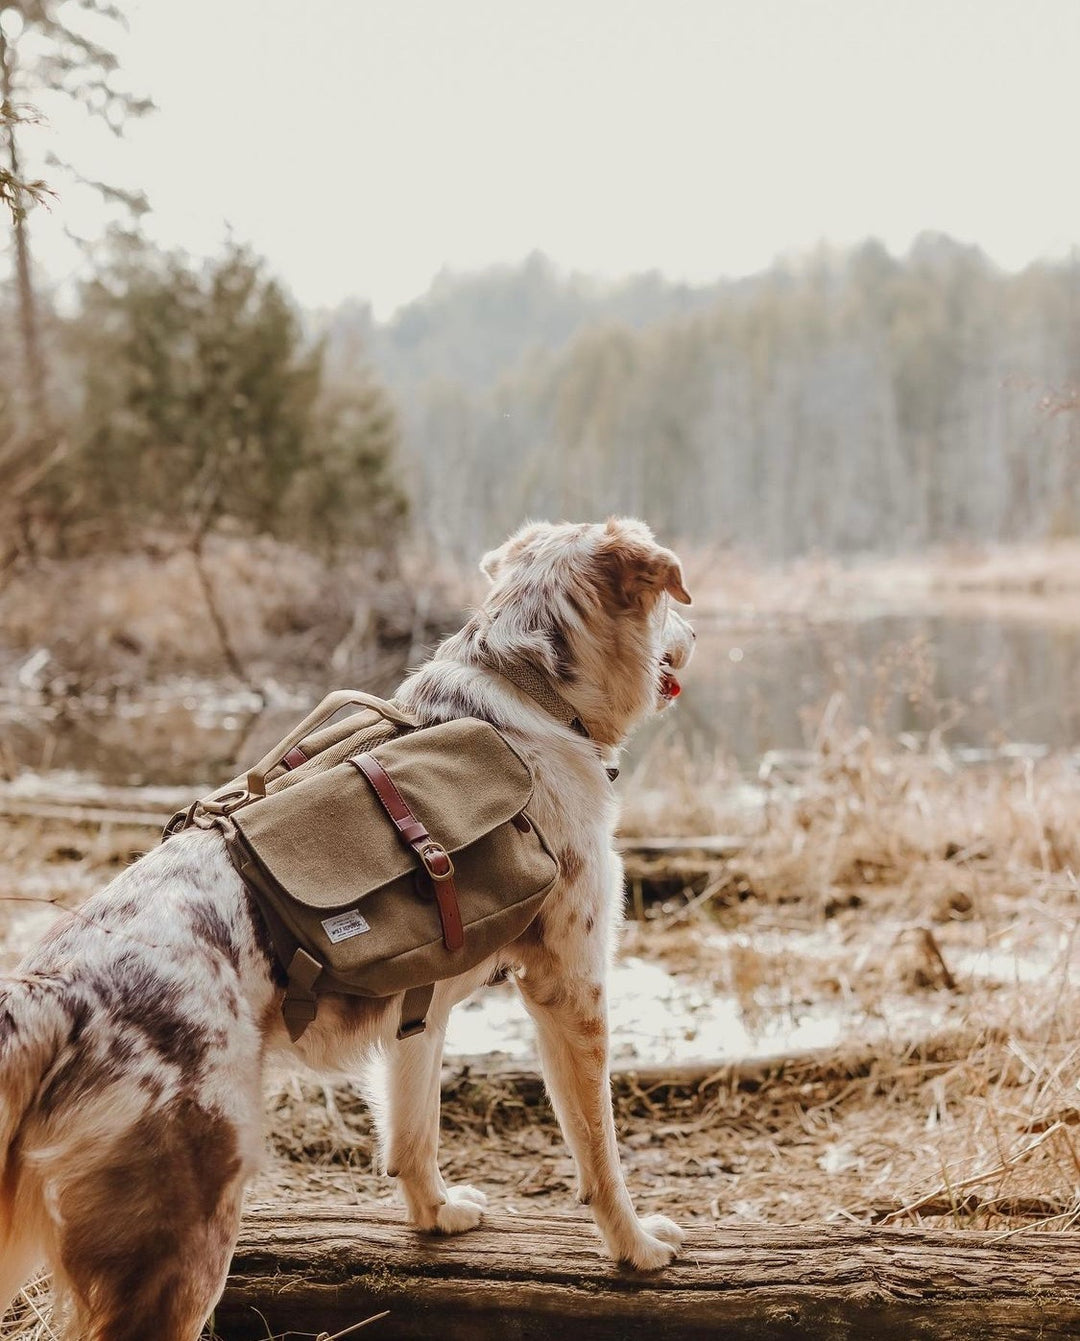 Top 5 National Parks That Are Dog Friendly